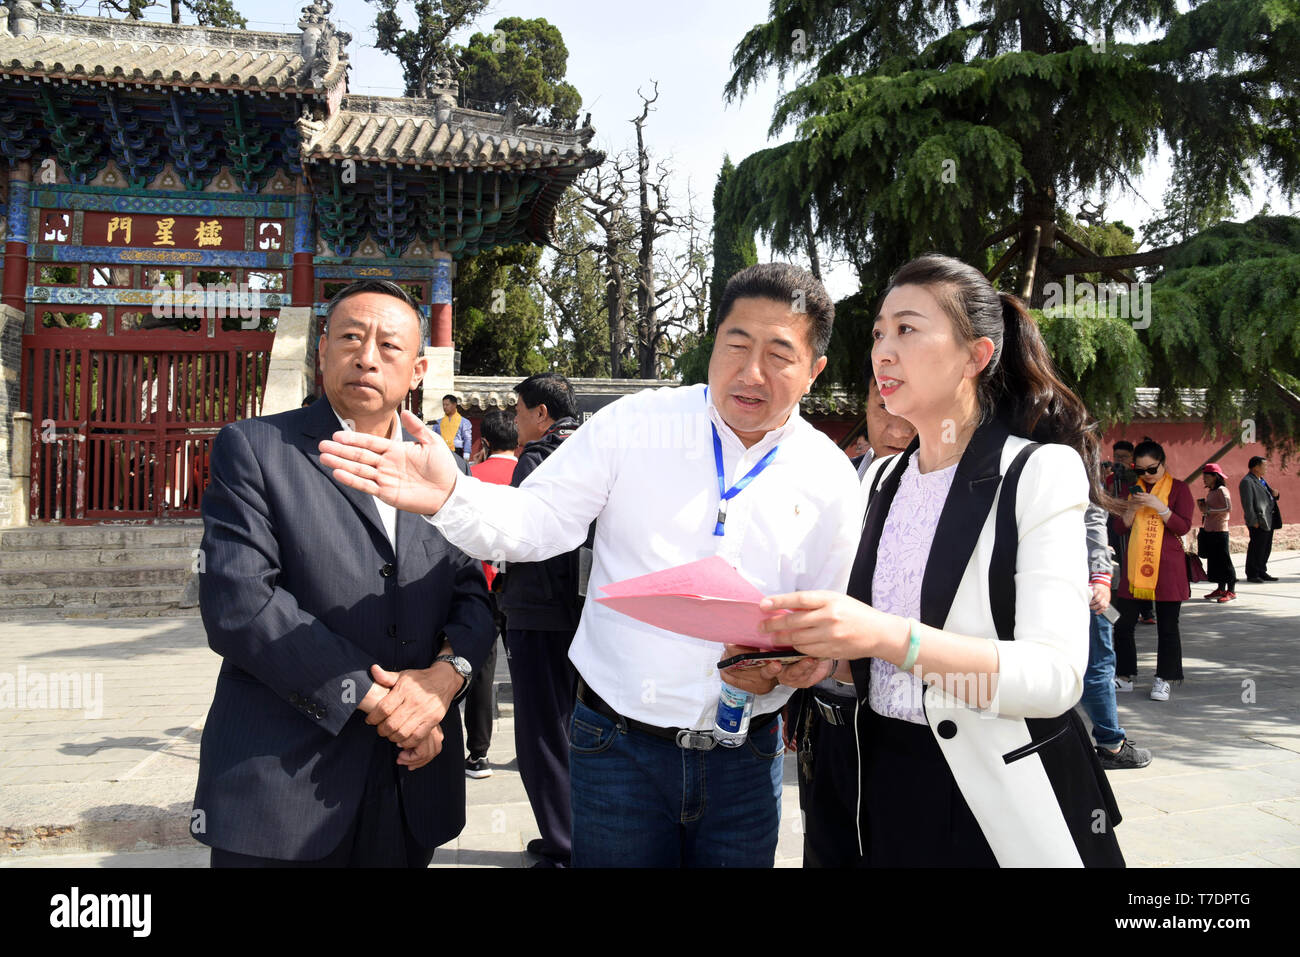 (190506) -- ZOUCHENG, May 6, 2019 (Xinhua) -- Meng Xing (R, front), the 72nd-generation descendant of ancient China's philosopher Mencius, talks with guests who come to attend the commemoration ceremony of Mencius and Mencius' mother at Mencius Temple in Zoucheng City, east China's Shandong Province, May 6, 2019. Living in a community near Mencius Temple, 37-year-old Meng Xing is in charge of the maintenance of Mencius Temple, Mencius Mansion and Mencius Cemetery. (Xinhua/Wang Kai) Stock Photo